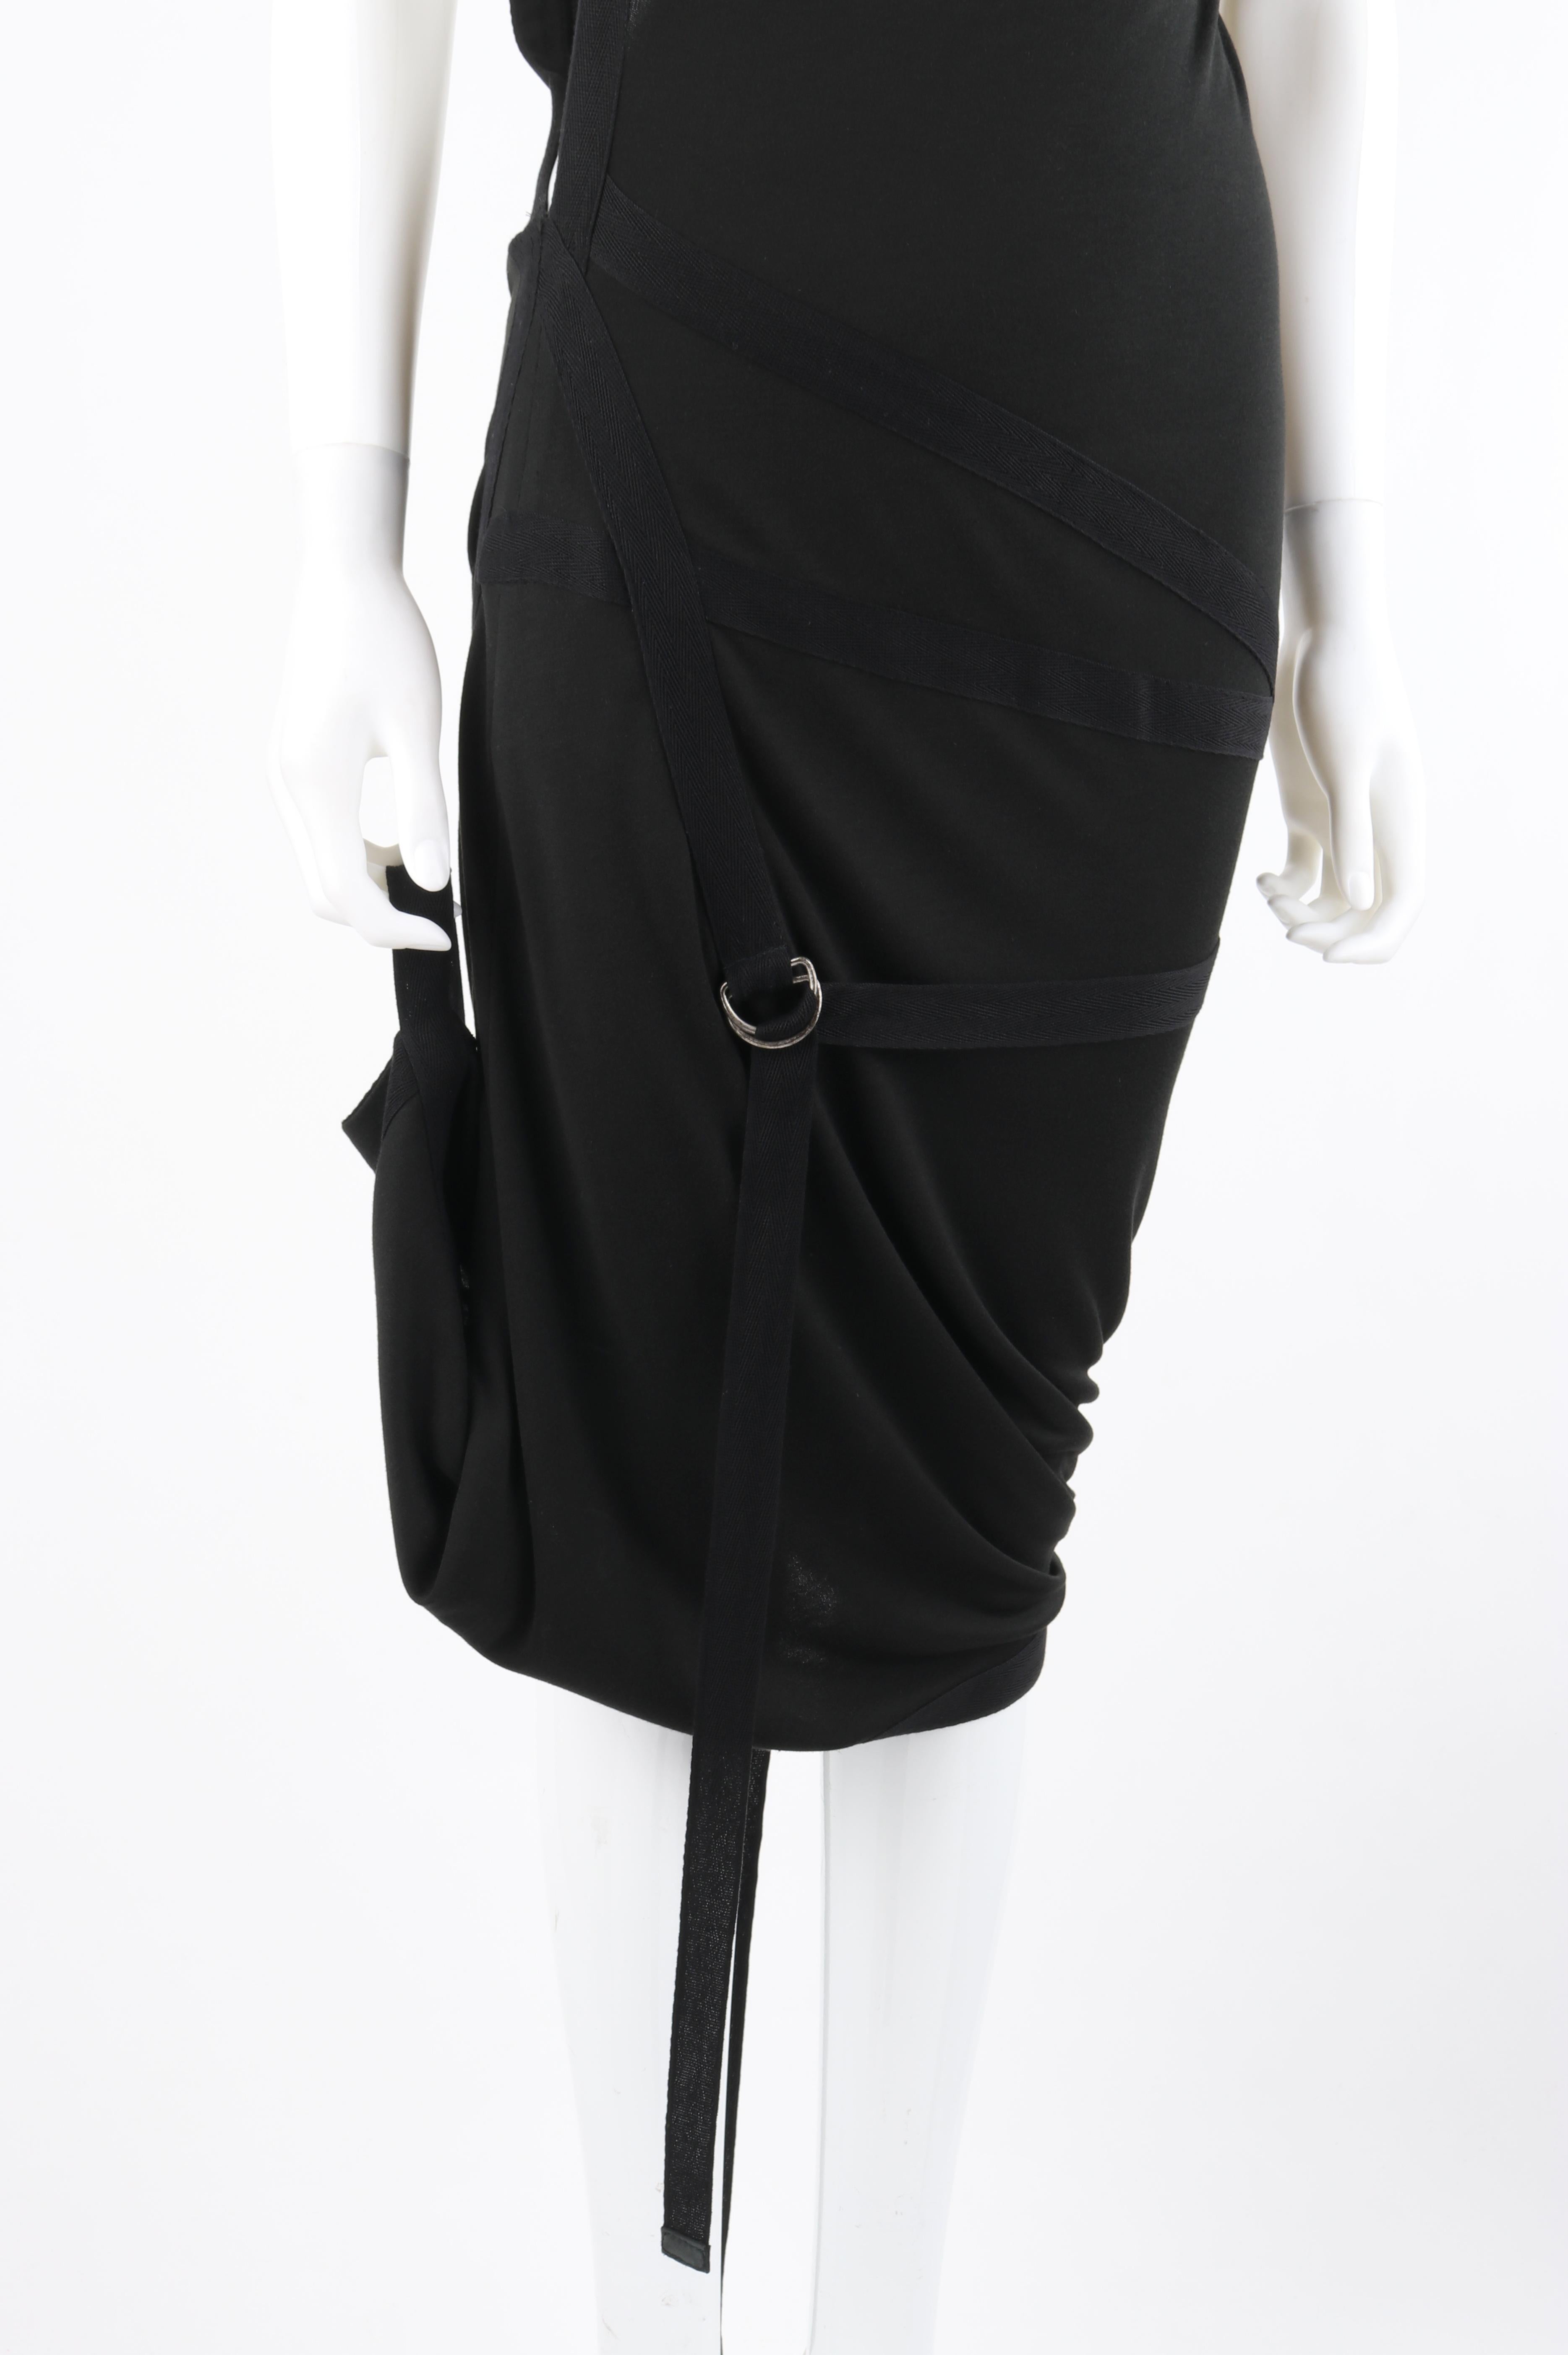 ALEXANDER McQUEEN S/S 2003 “Irere” Black One Shoulder Leather Buckle Strap Dress In Good Condition In Thiensville, WI